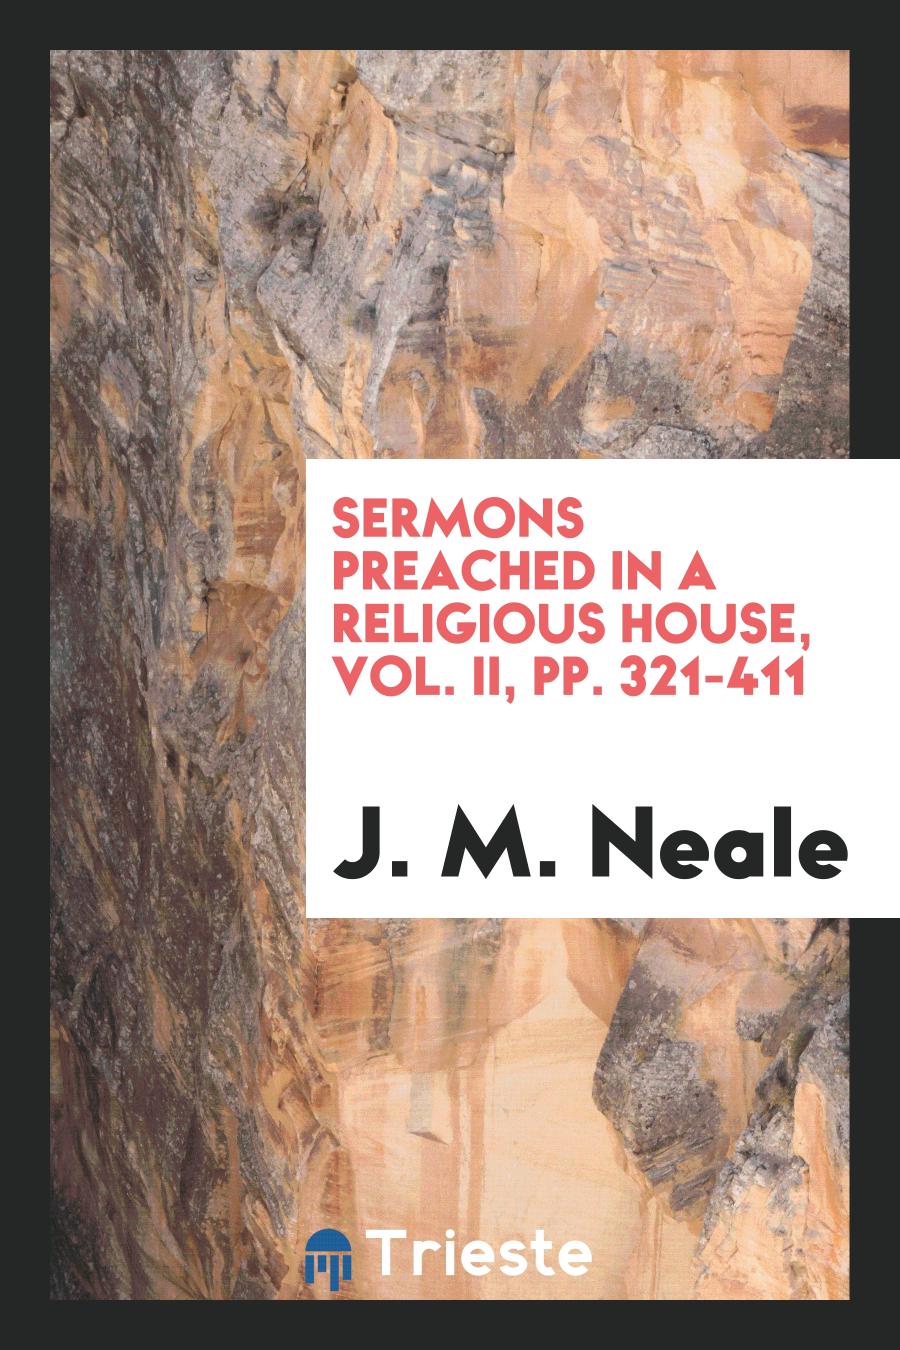 Sermons Preached in a Religious House, Vol. II, pp. 321-411